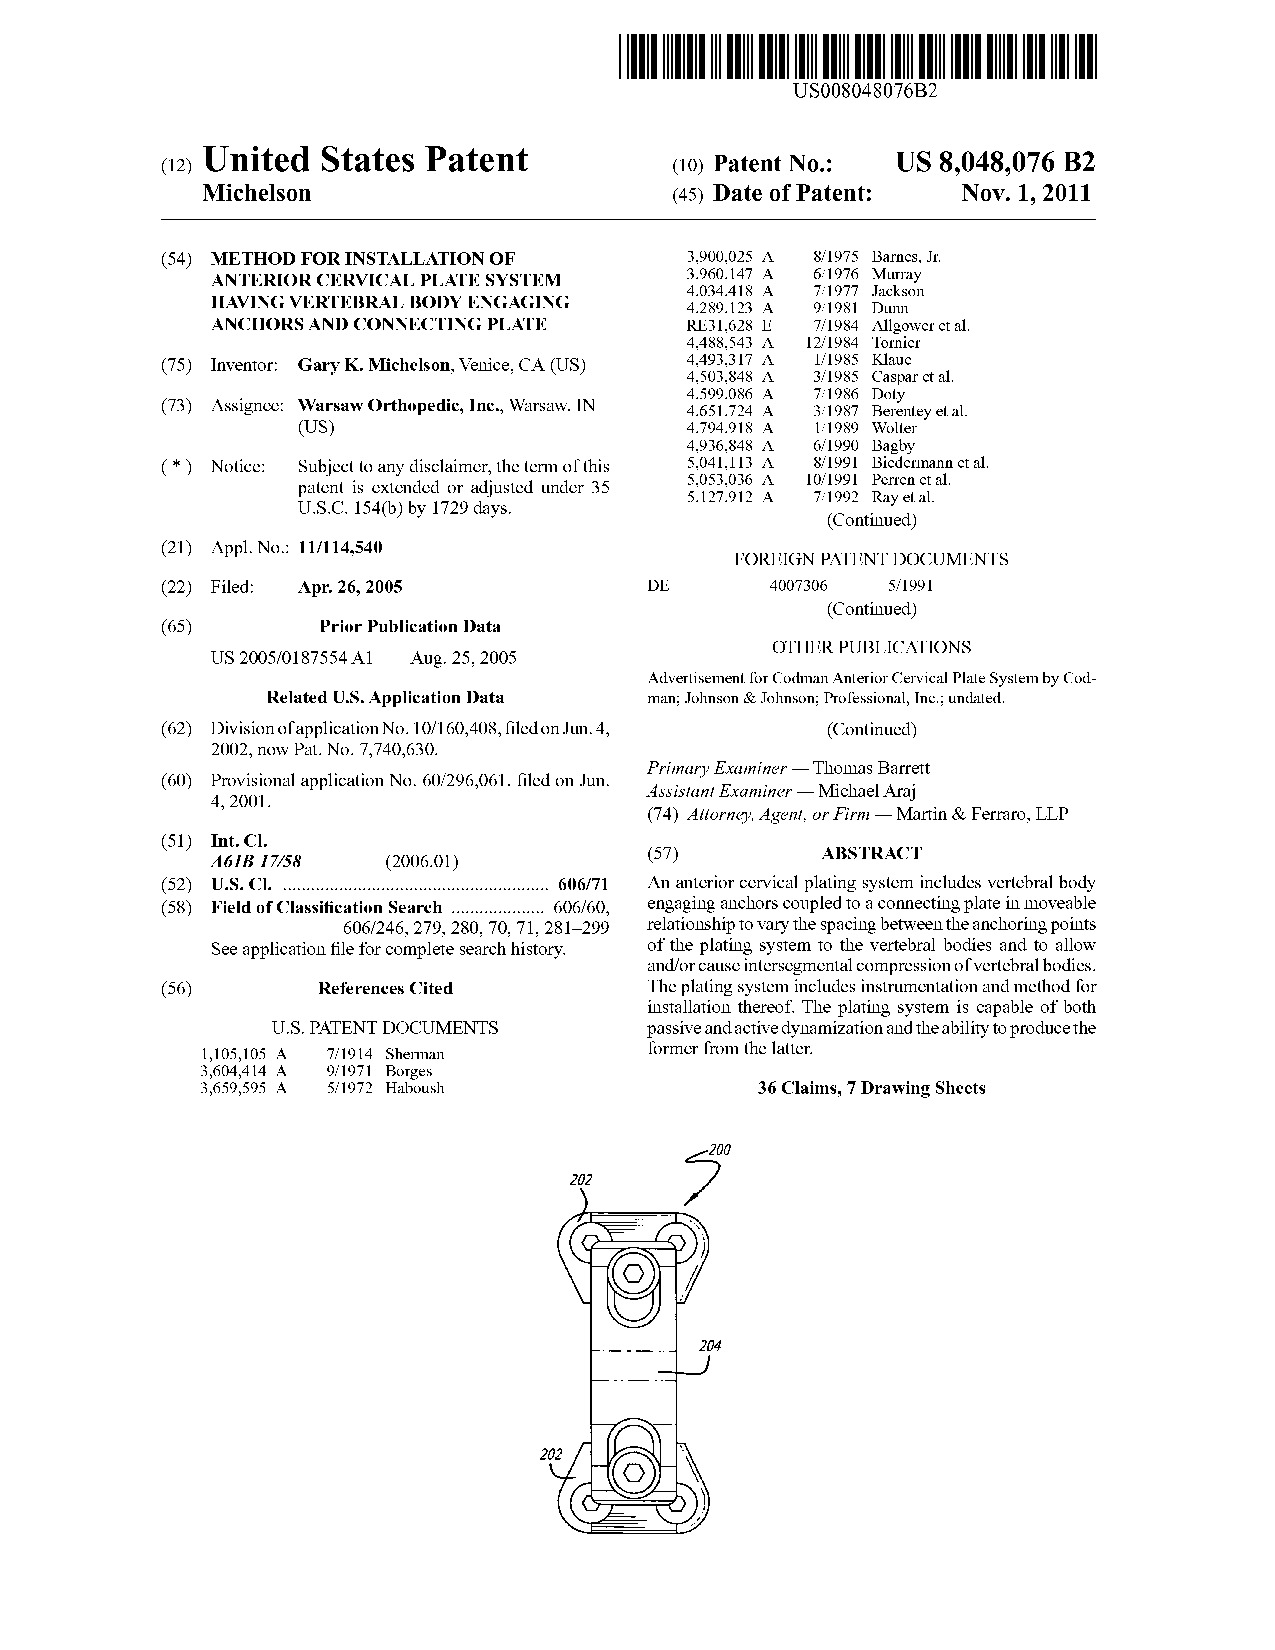 Method for installation of anterior cervical plate system having vertebral     body engaging anchors and connecting plate - Patent 8,048,076